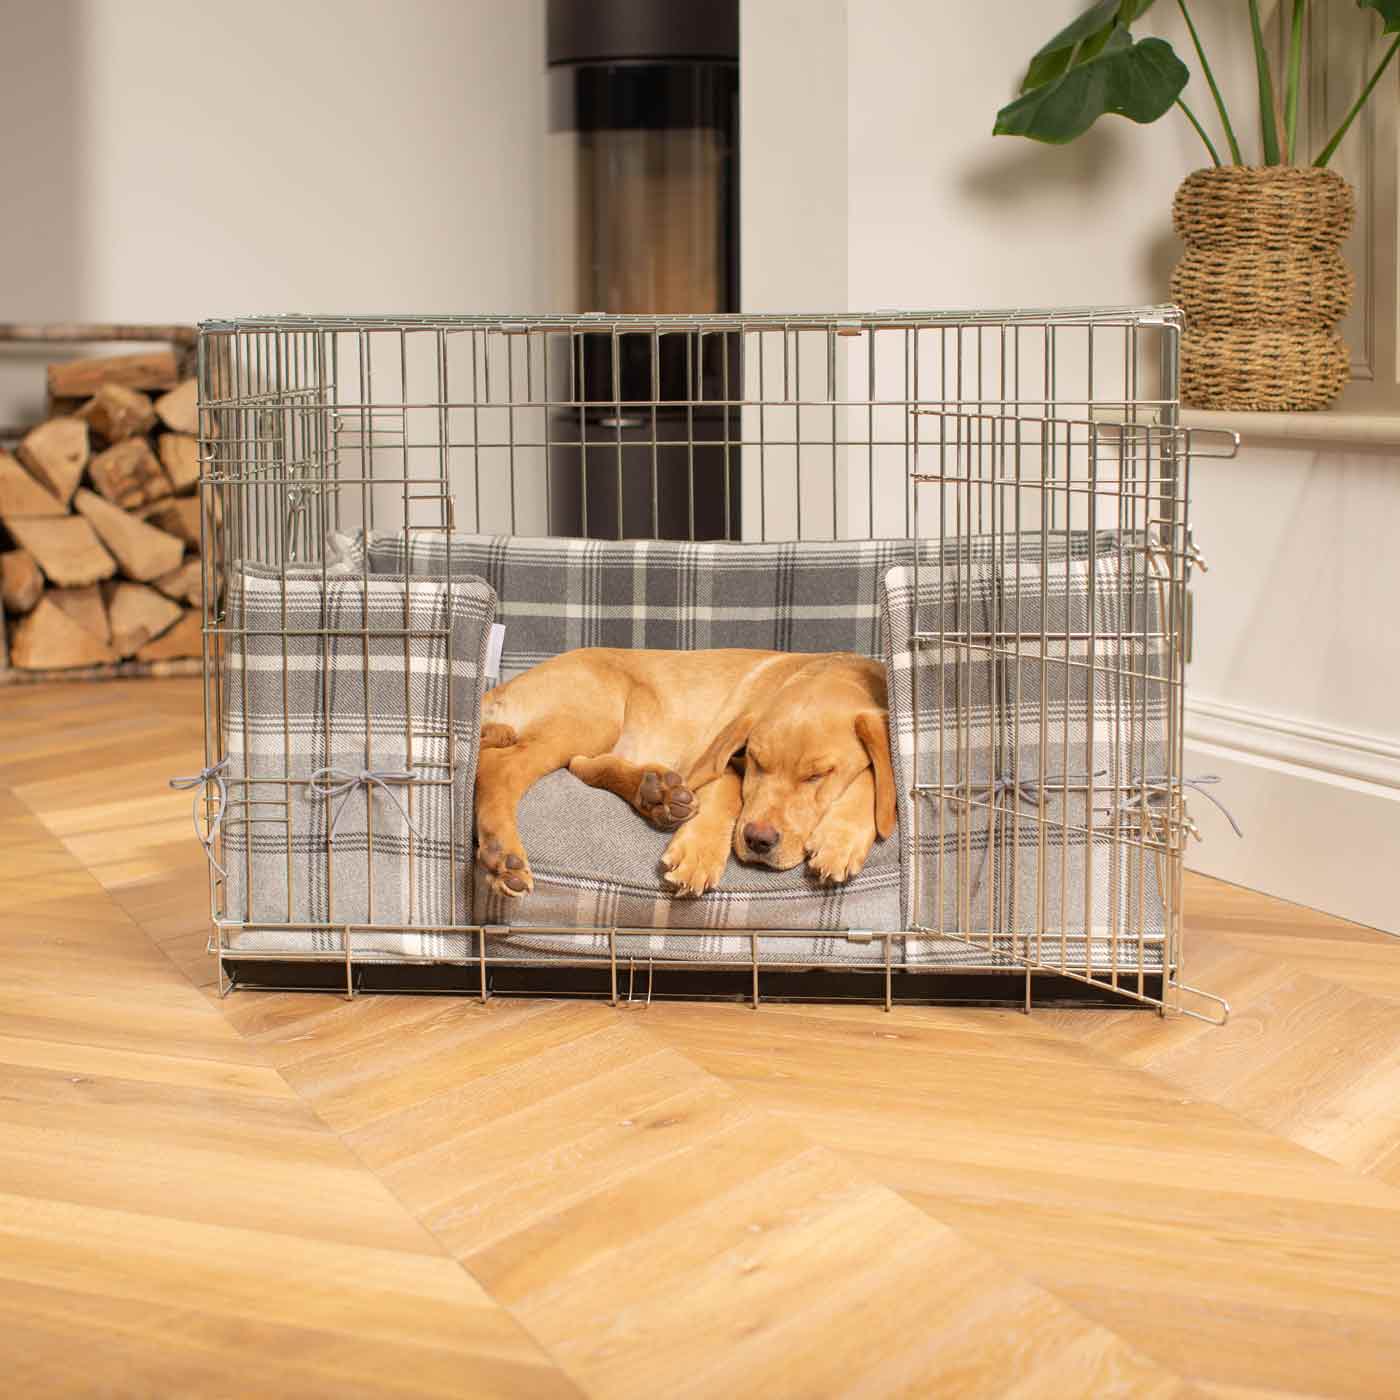 Luxury Dog Cage Bumper, Balmoral Dove Grey Tweed Cage Bumper Cover The Perfect Dog Cage Accessory, Available Now at Lords & Labradors US